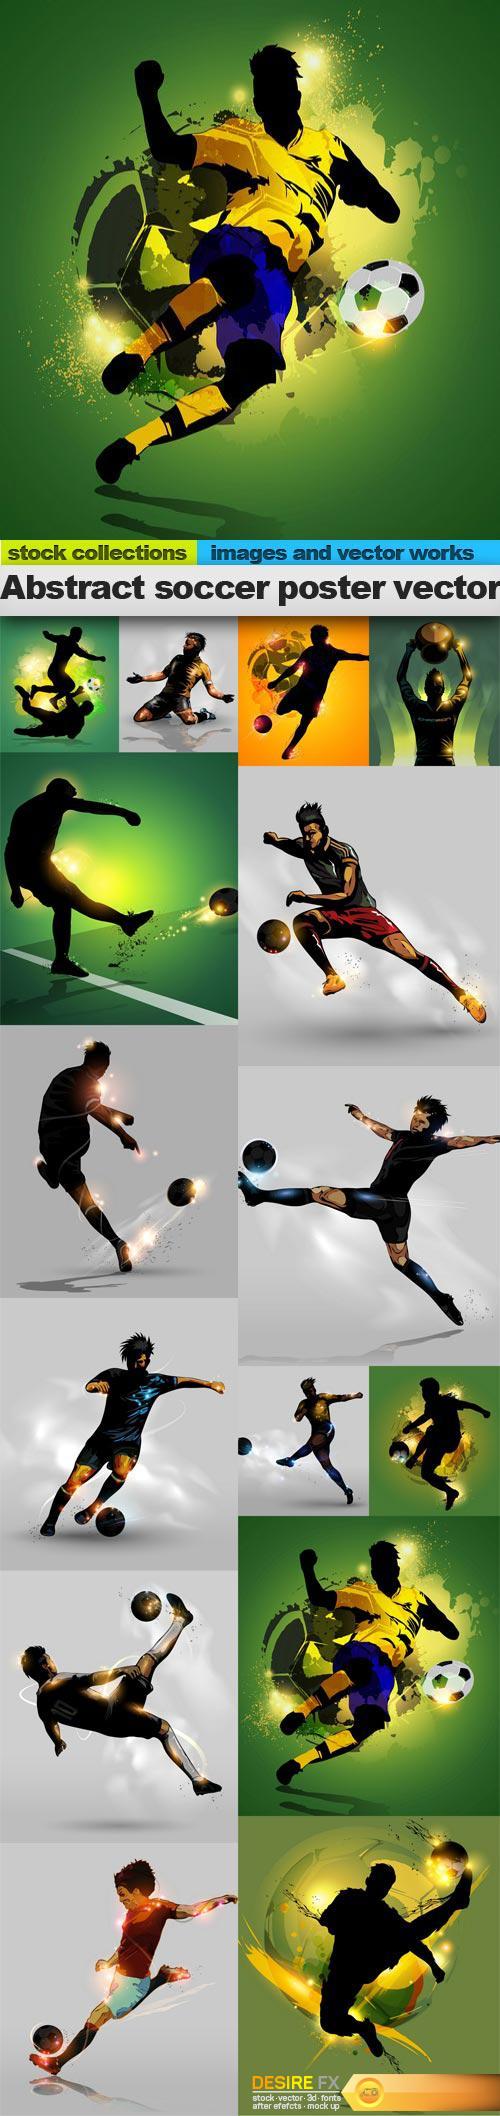 Abstract soccer poster vector, 15 x EPS